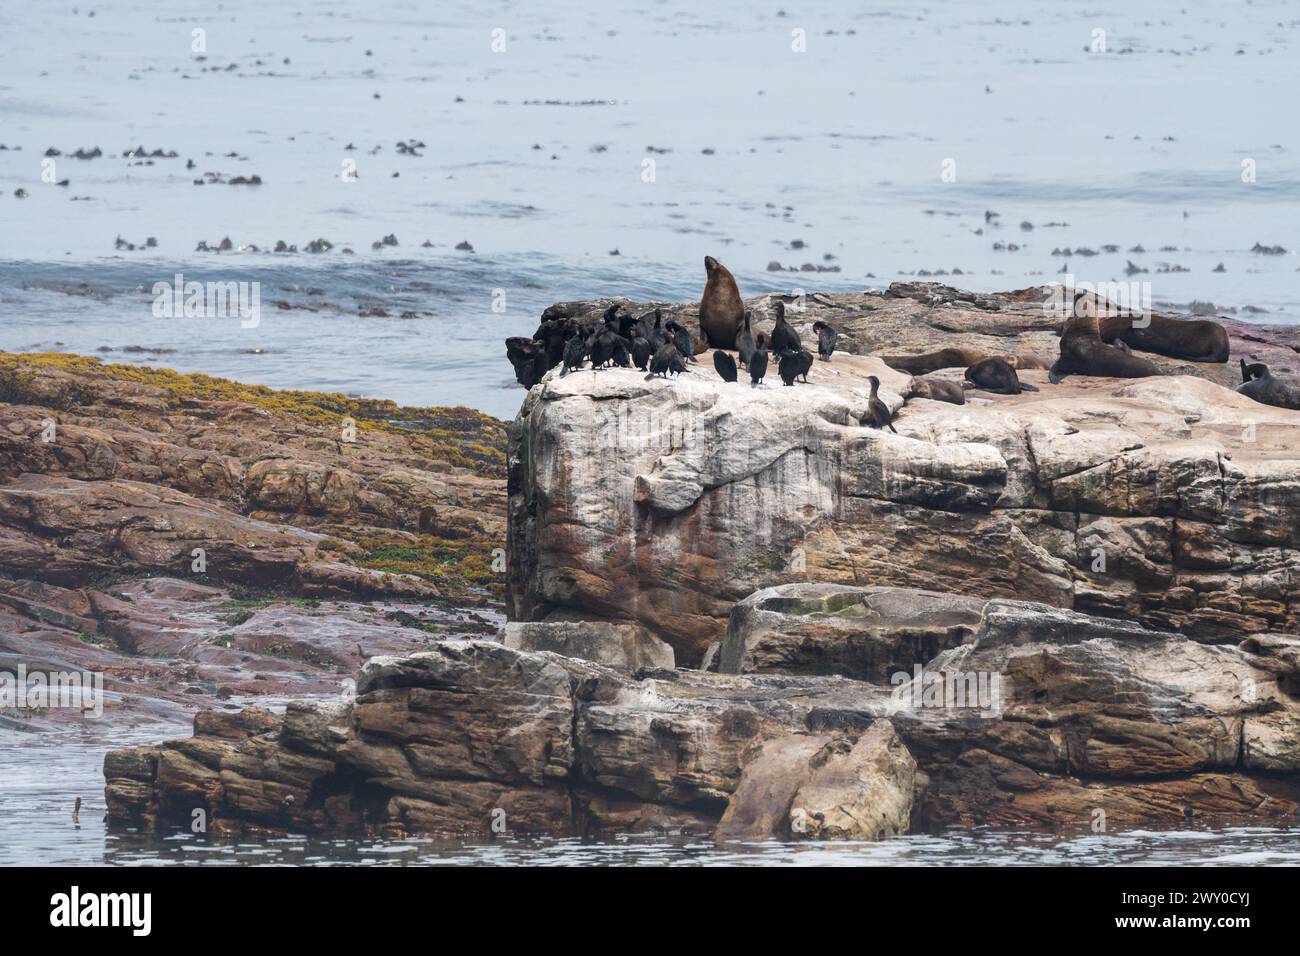 seascape of rocks surrounded by sea or ocean water with seals and cormorants on top close up at Cape Point, Cape of Good Hope nature reserve Stock Photo